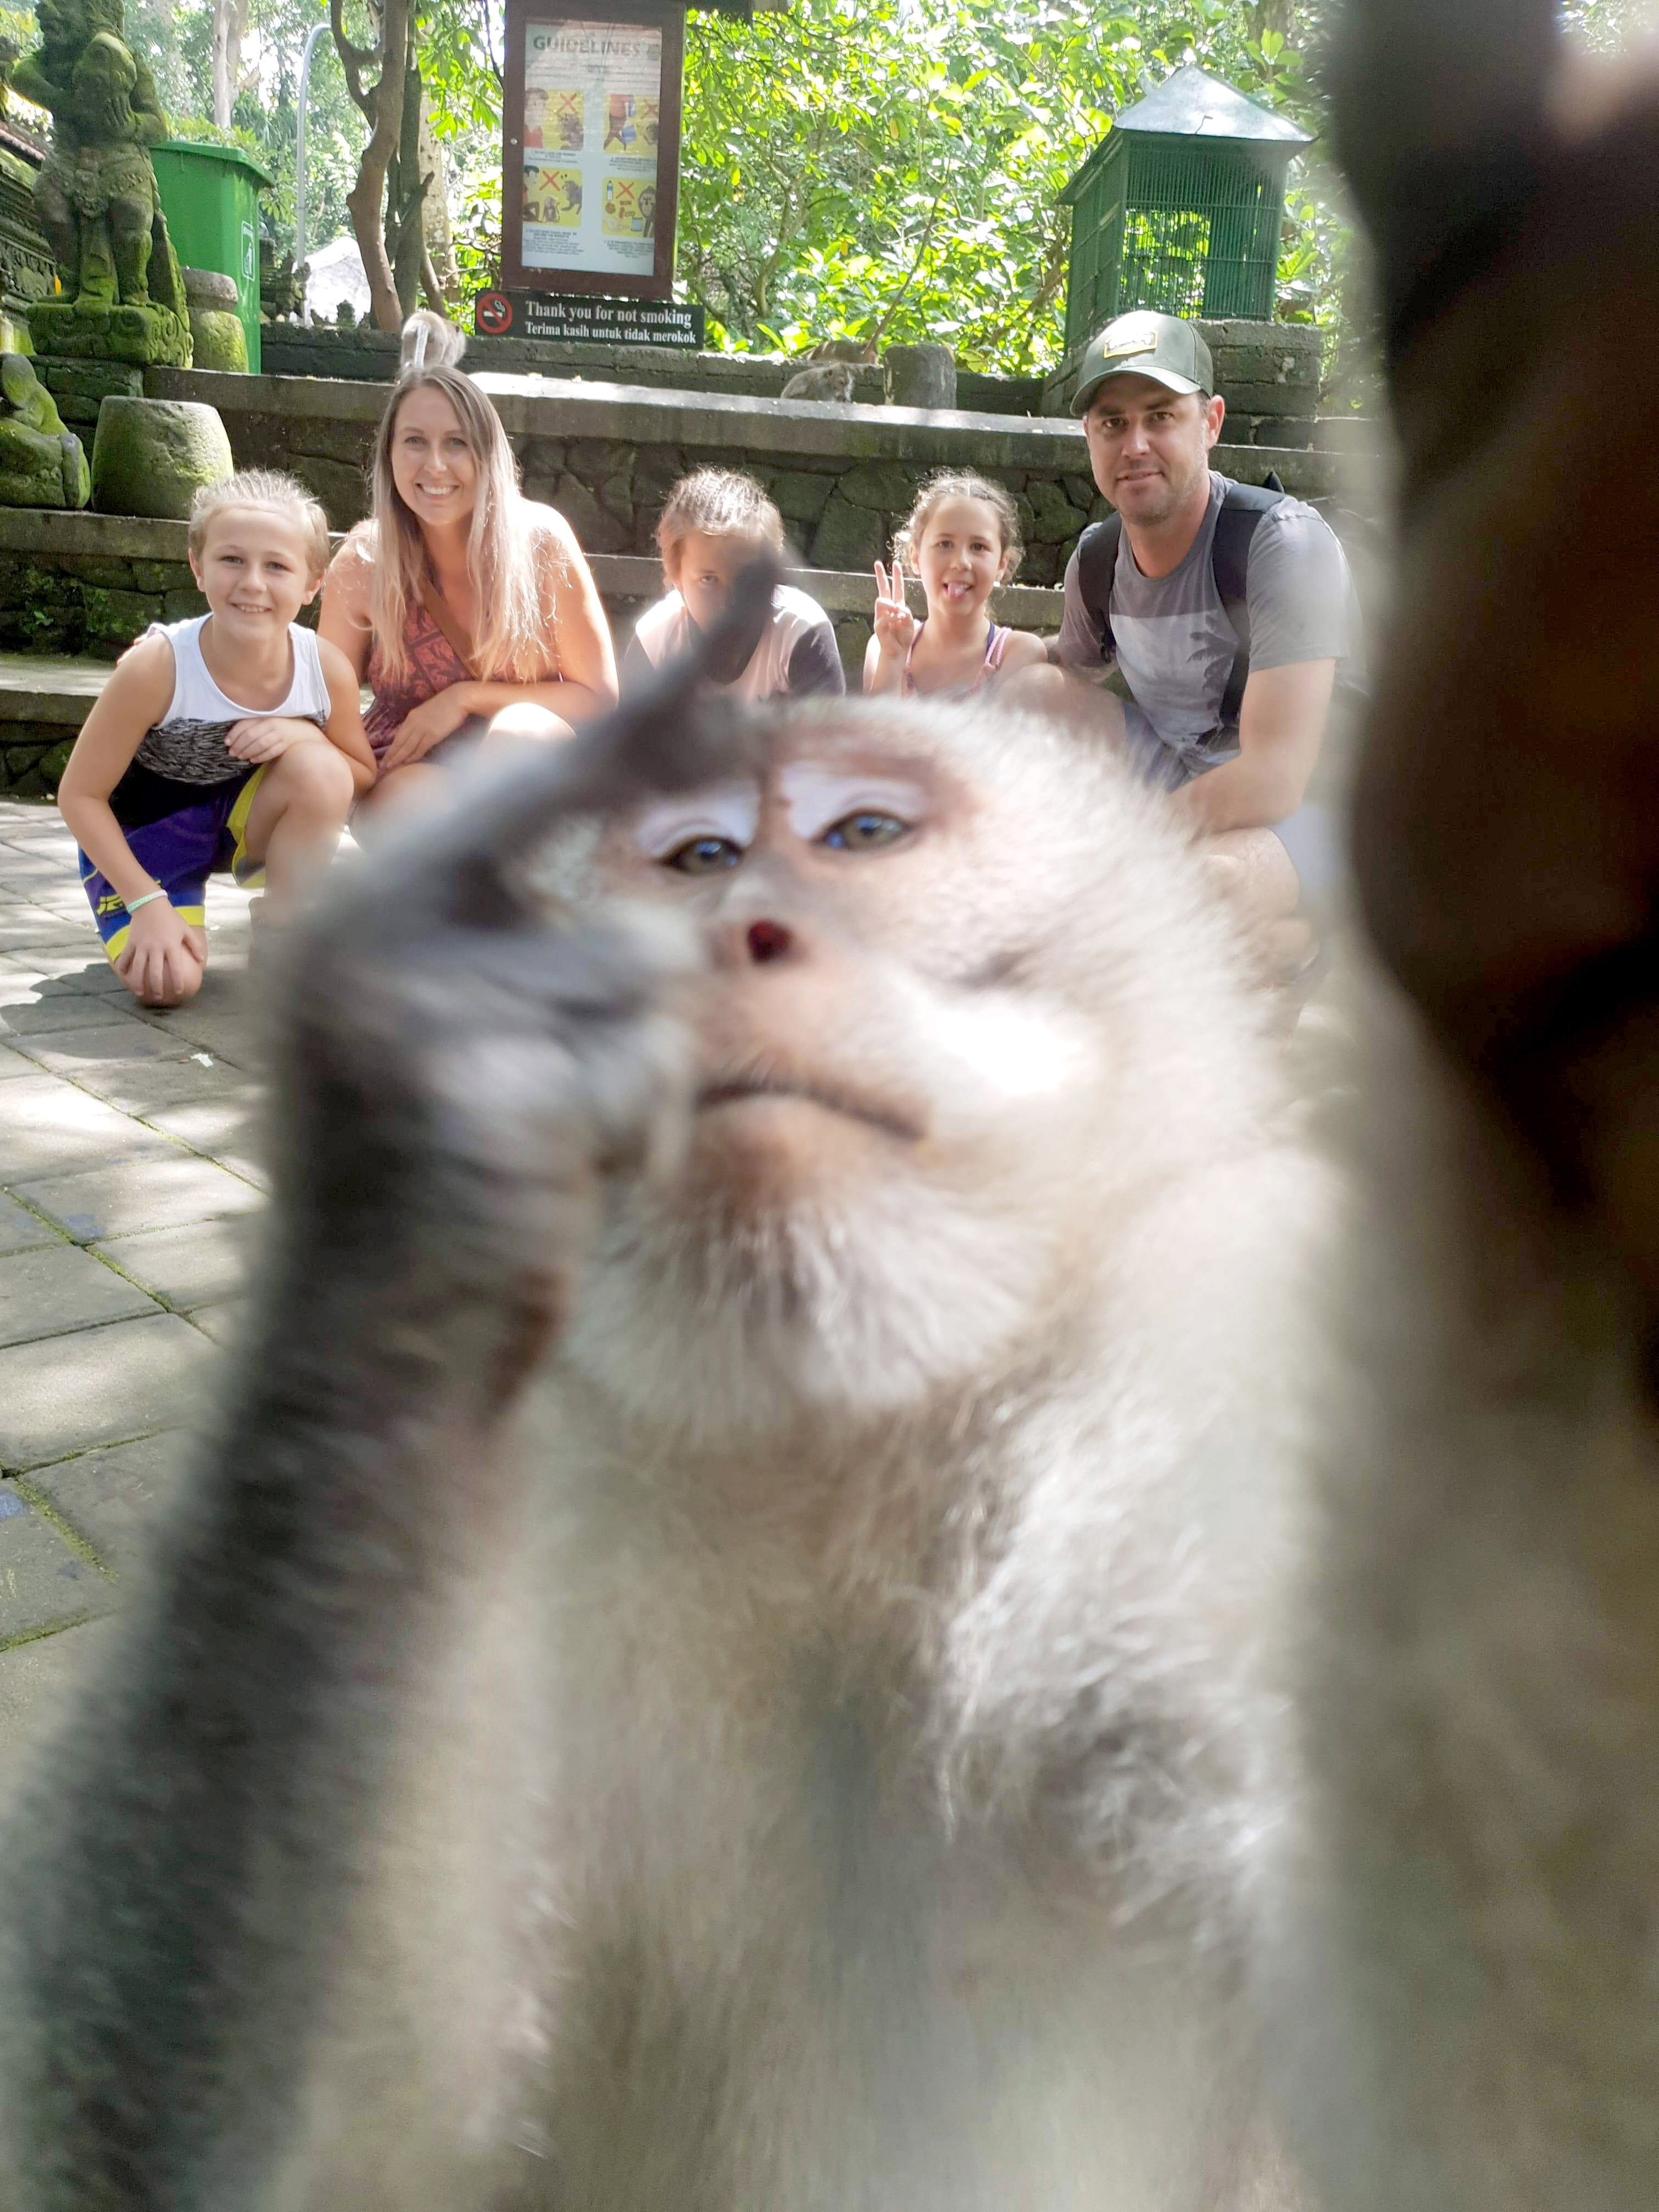 A Monkey Photobombs Family Pictures And Got Snapped Giving Them A Middle Finger